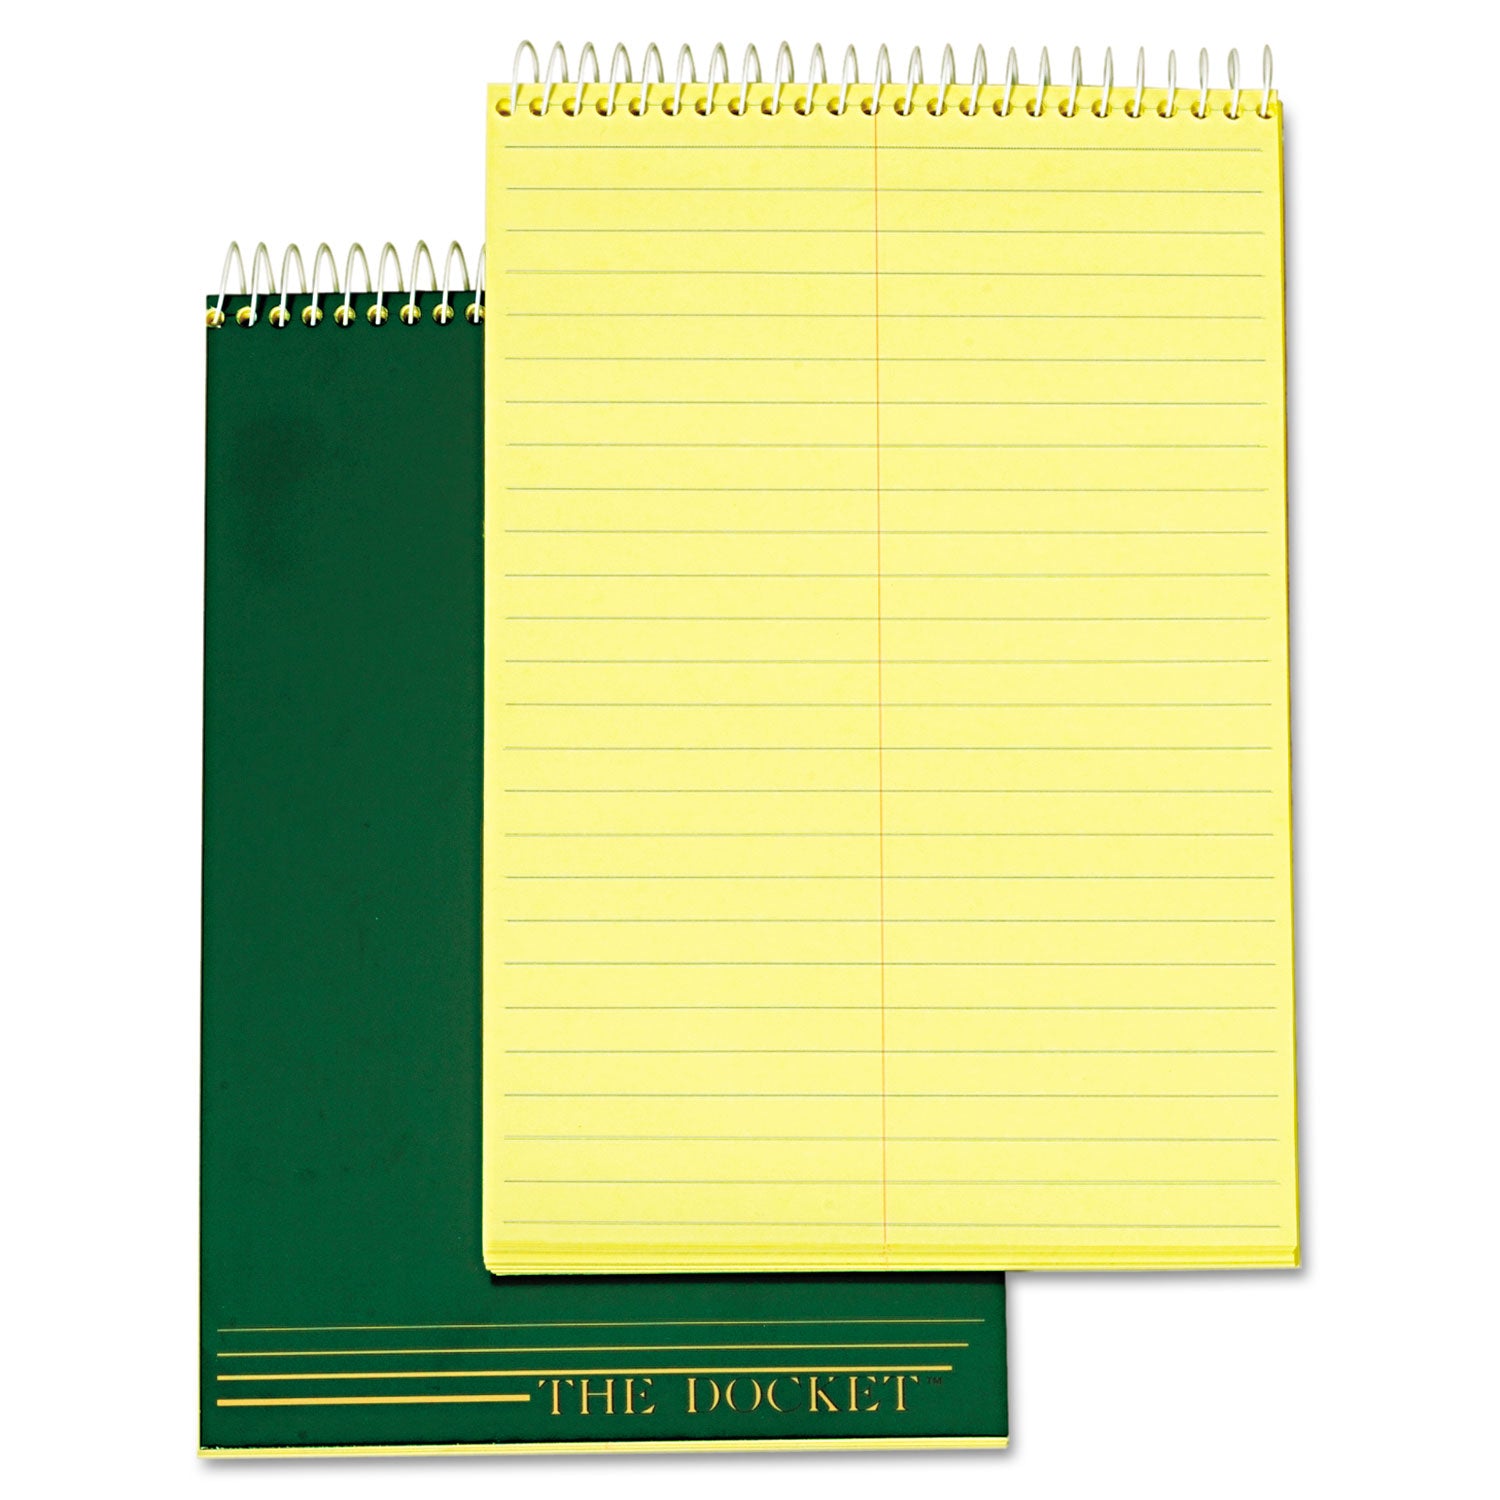 docket-steno-pad-gregg-rule-forest-green-cover-100-canary-yellow-6-x-9-sheets_top63851 - 1